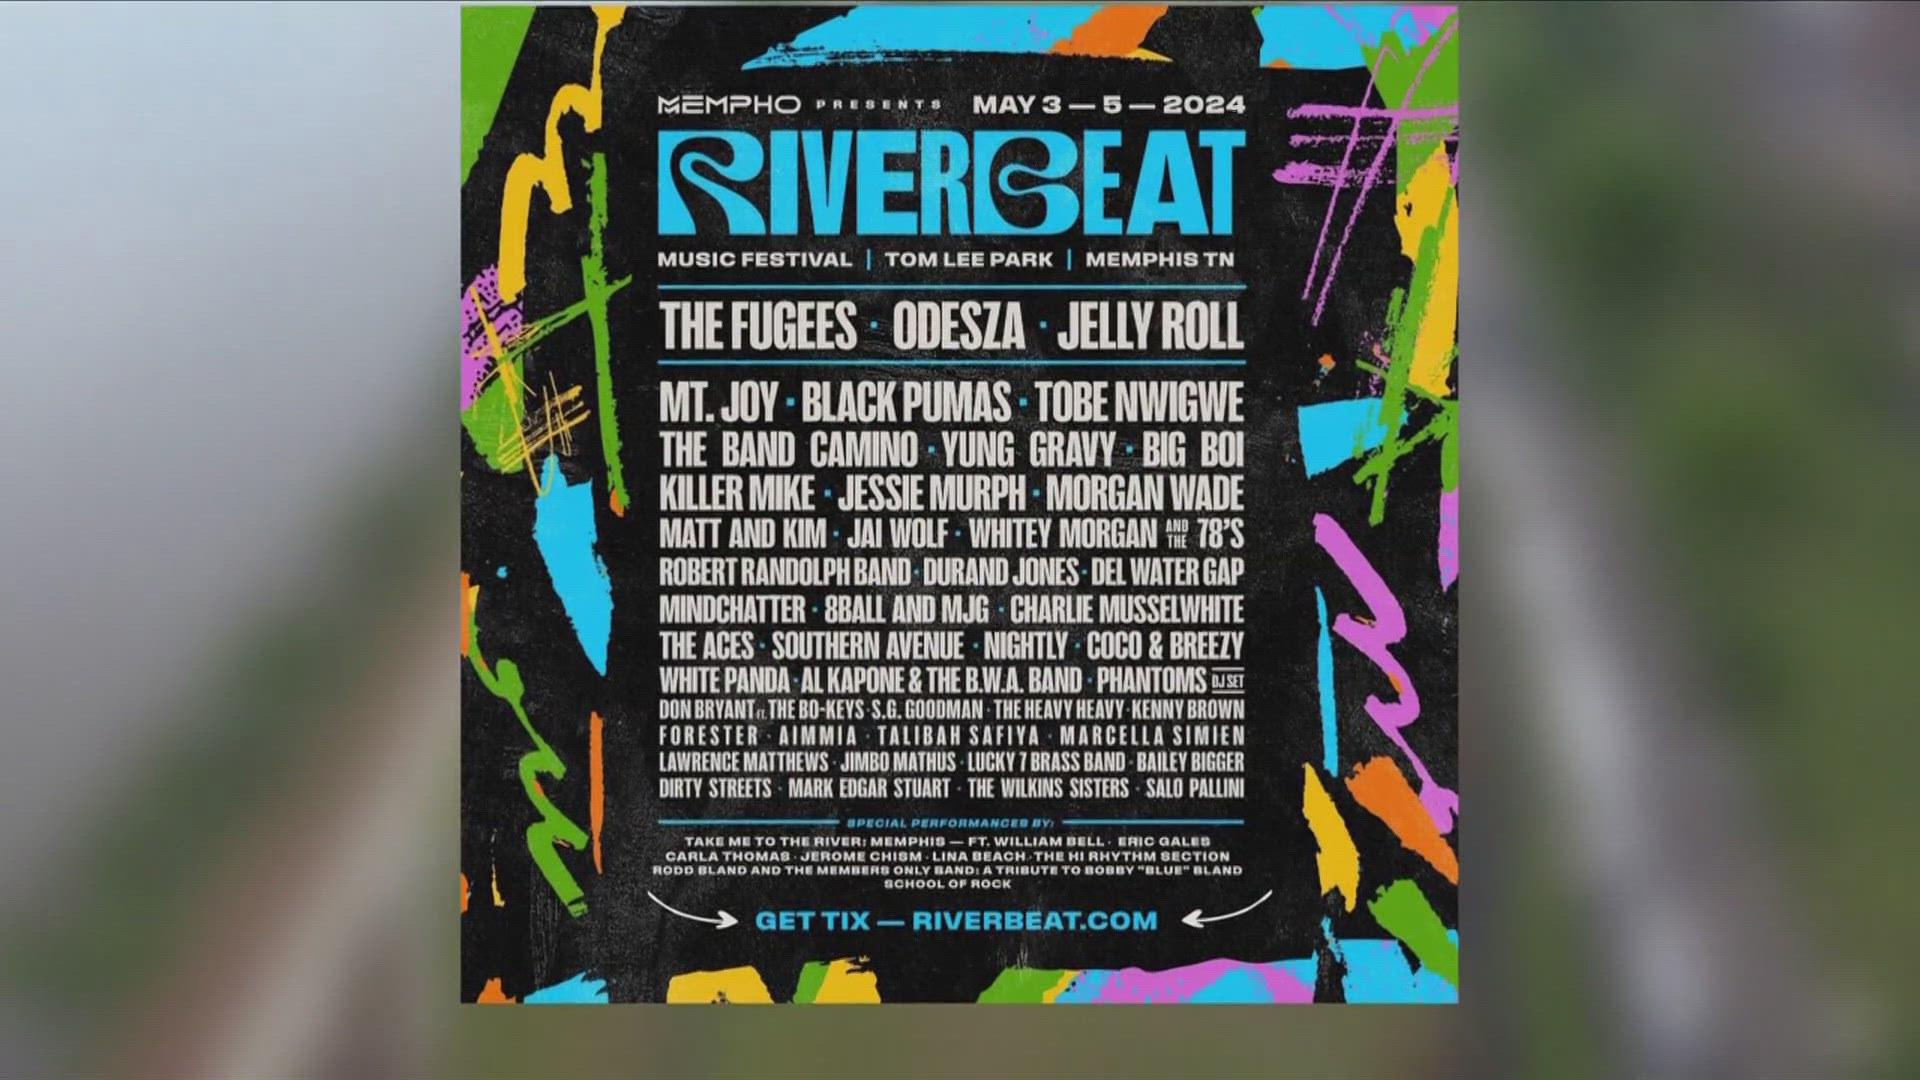 The RiverBeat Music festival will take place May 3-5, 2024. The full 2024 lineup includes Tobe Nwigwe, The Band Camino, Killer Mike and more.